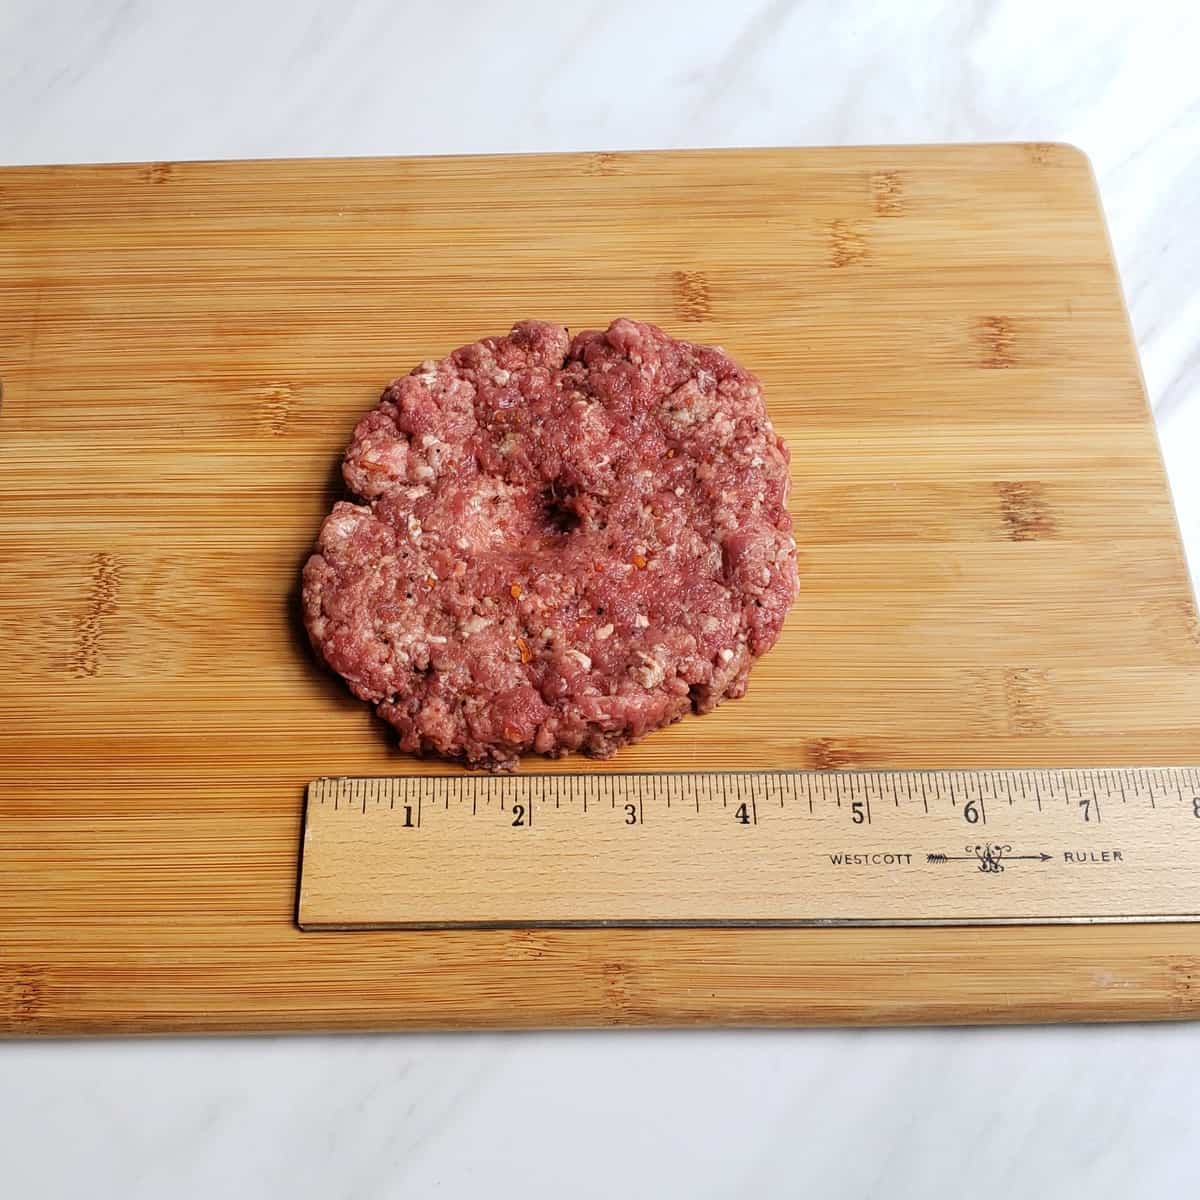 Raw ground meat patty with thumb print pressed in middle and ruler next to it